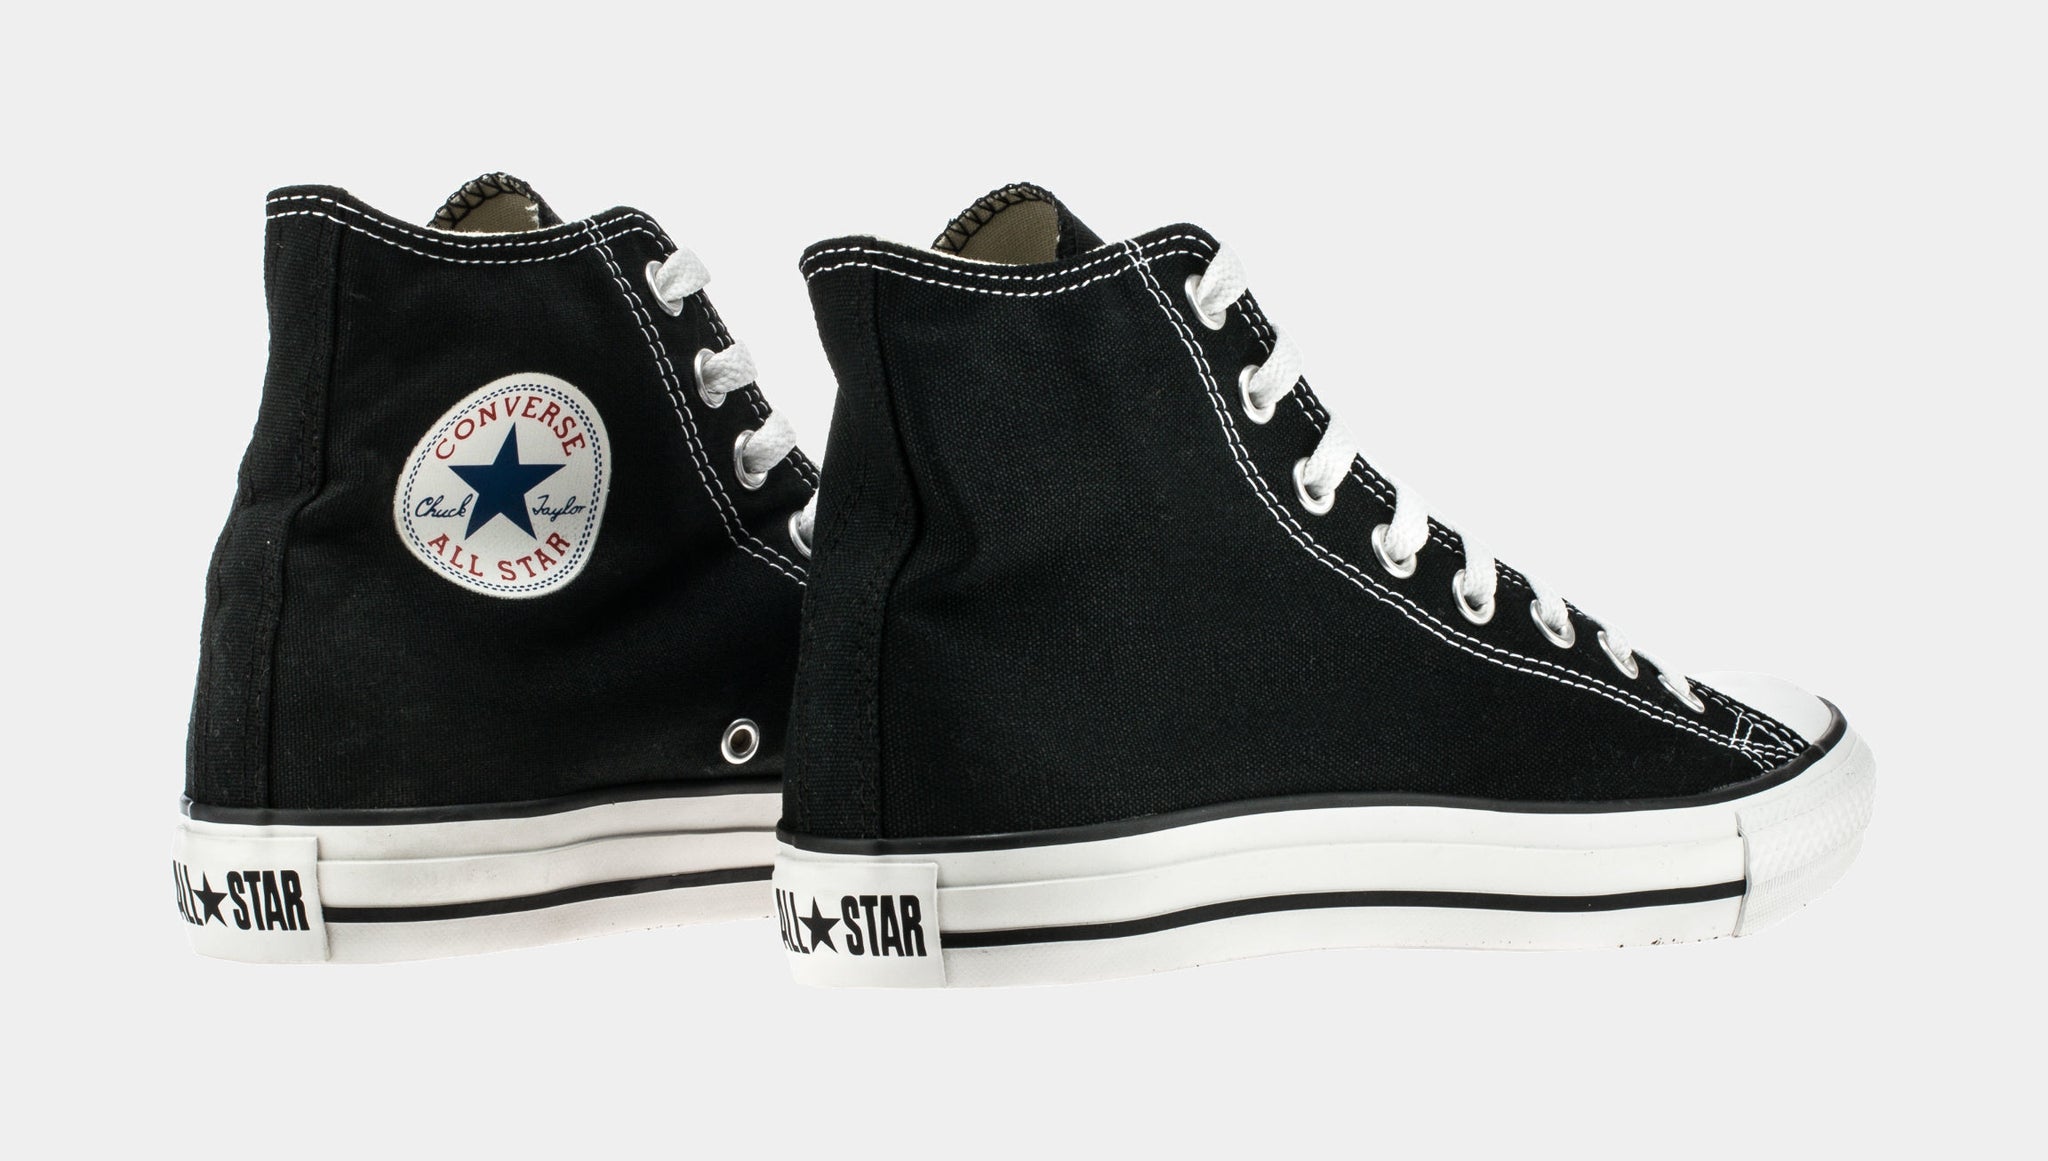 gesponsord Klokje Scheiding Converse Chuck Taylor All Star Classic Colors High Solid Canvas Mens  Lifestyle Shoe Black M9160 – Shoe Palace